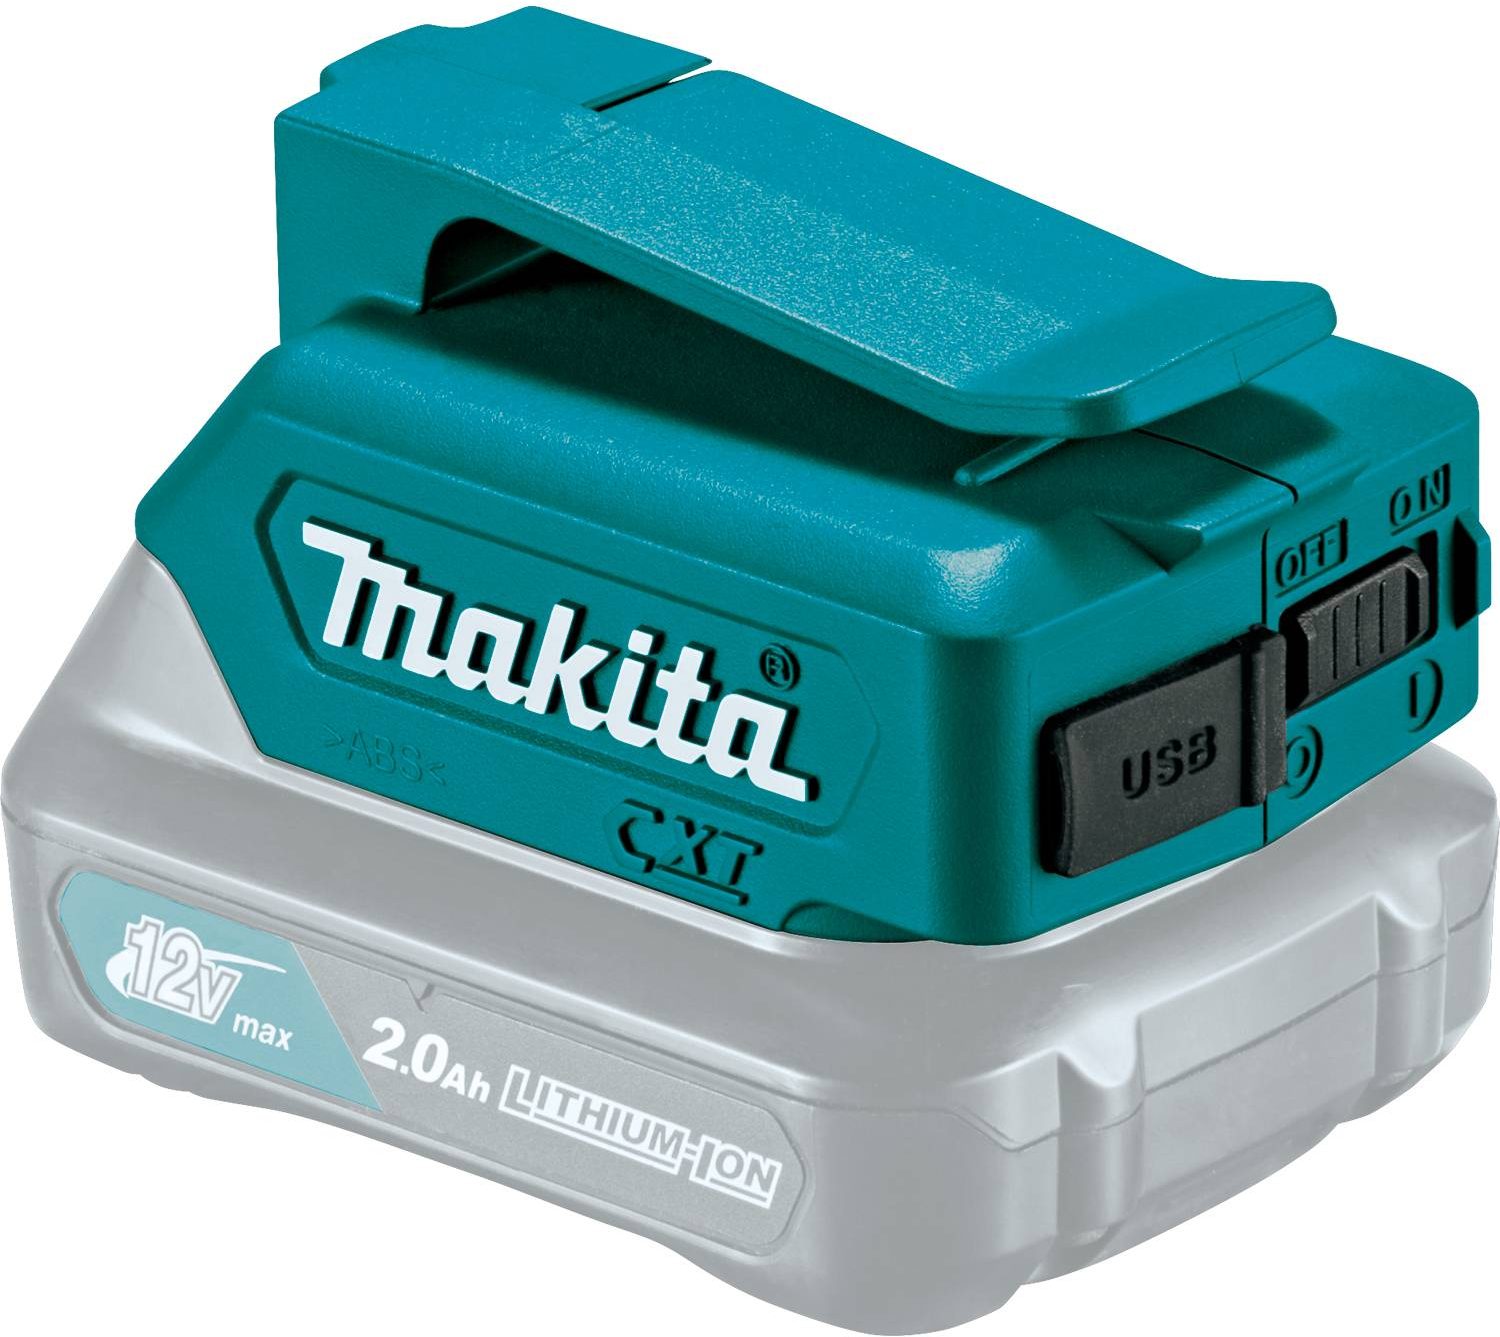 Makita Cc02z 12v Max Cxt Lithium Ion Cordless 3 38 In Tileglass Saw The Tool Nut 